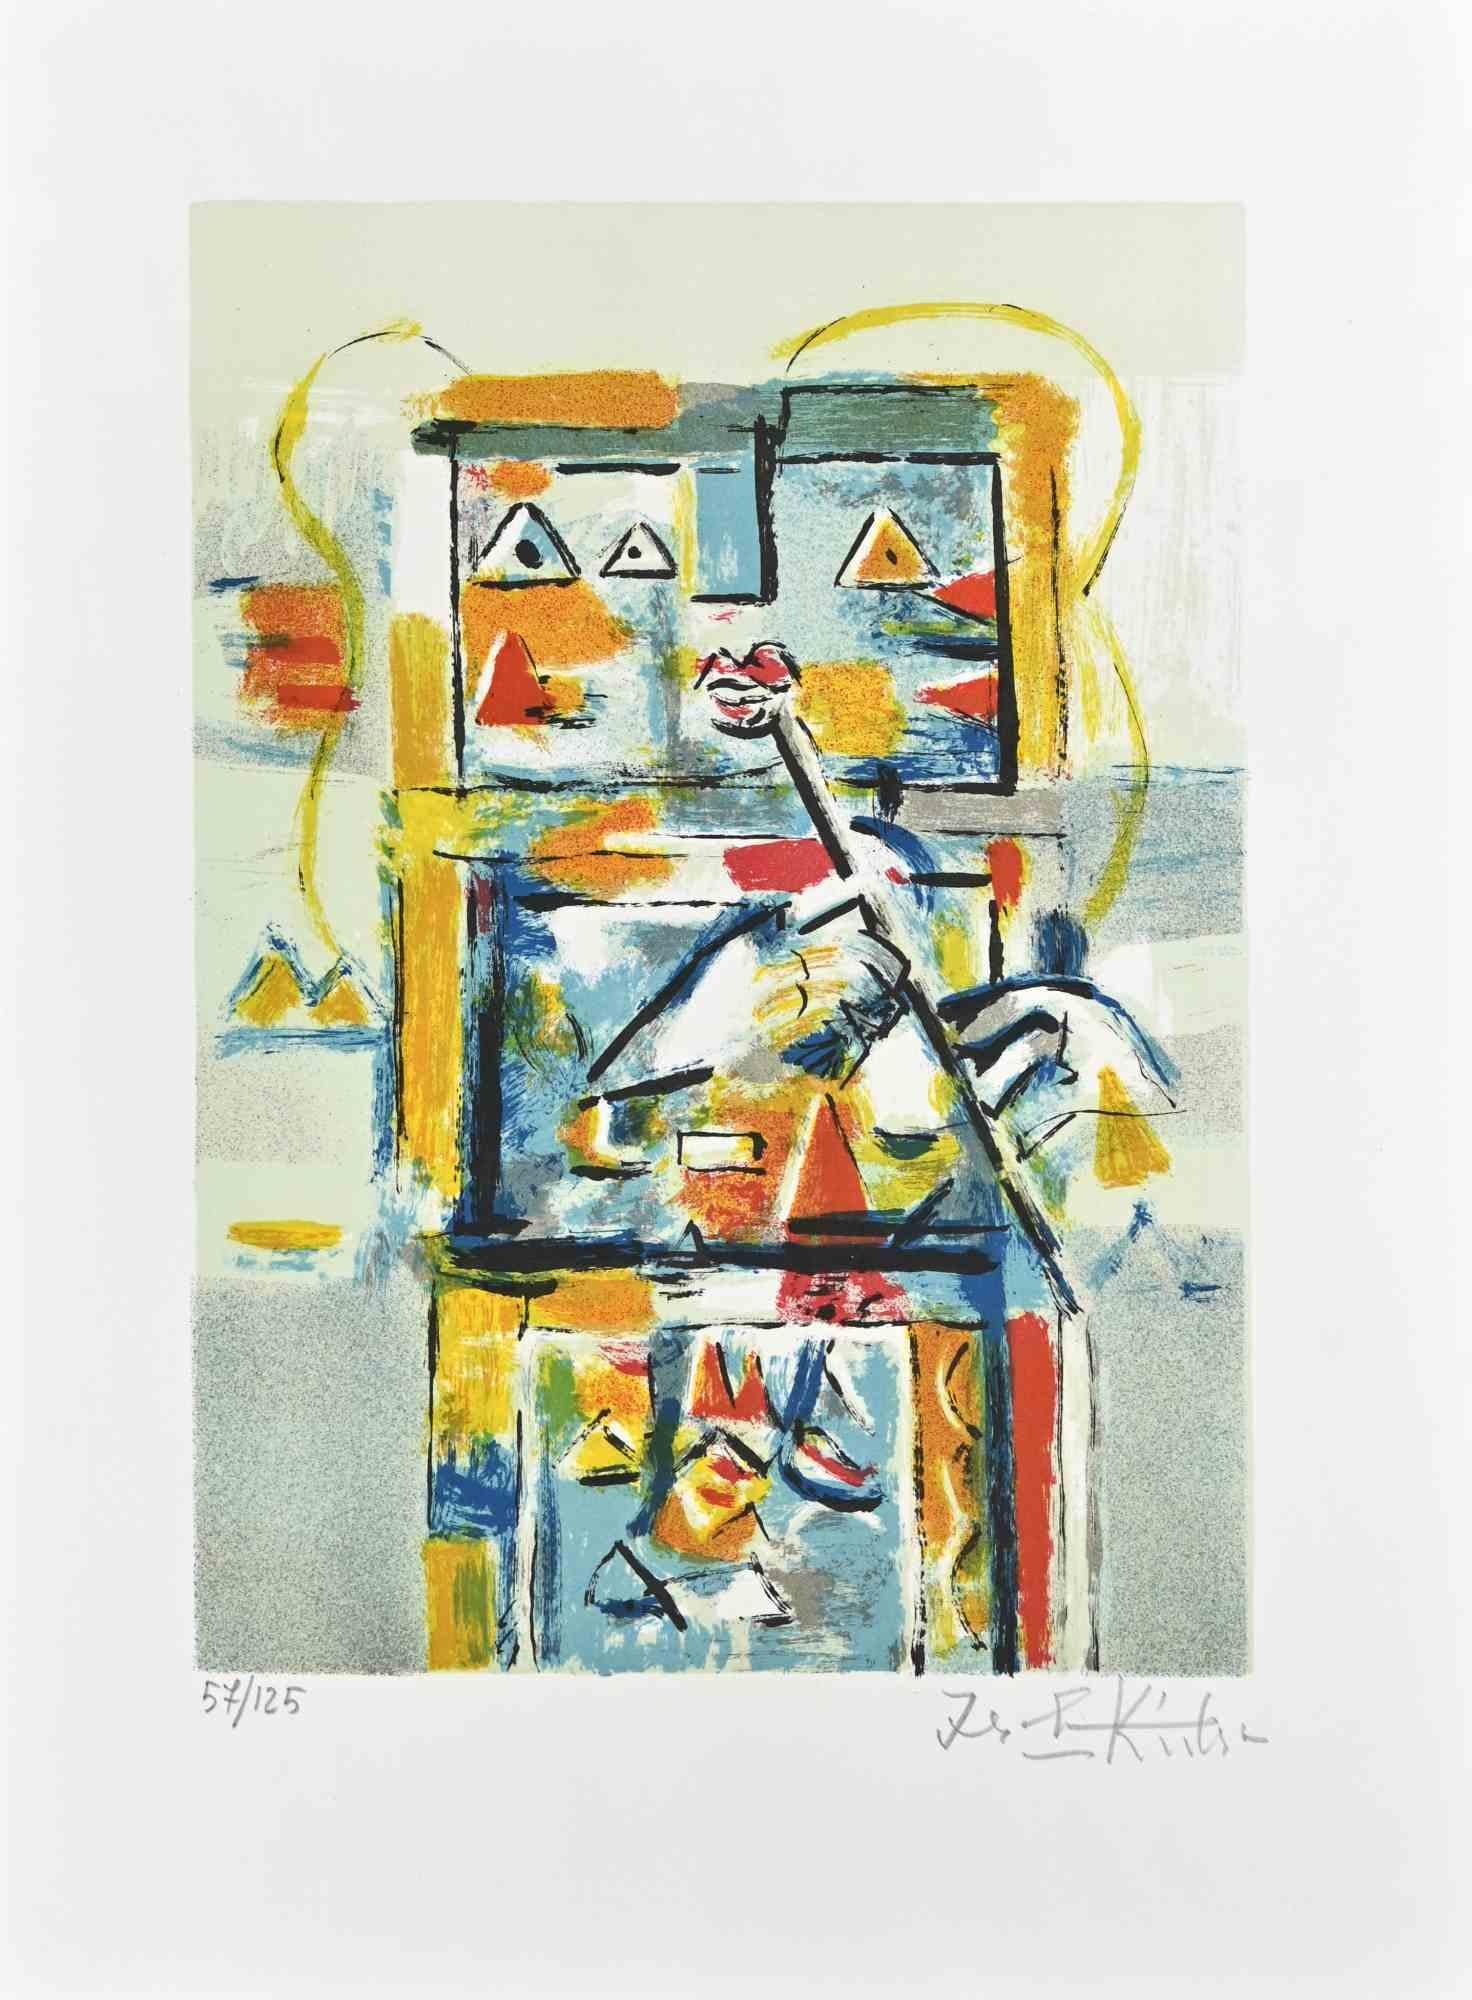 Robot is a lithograph realized in 1980s by Ibrahim Kodra.

Hand-signed on the lower right.

Numbered. Edition,57/125.

Very Good conditions.

The artwork is depicted through soft strokes in a well-balanced composition.